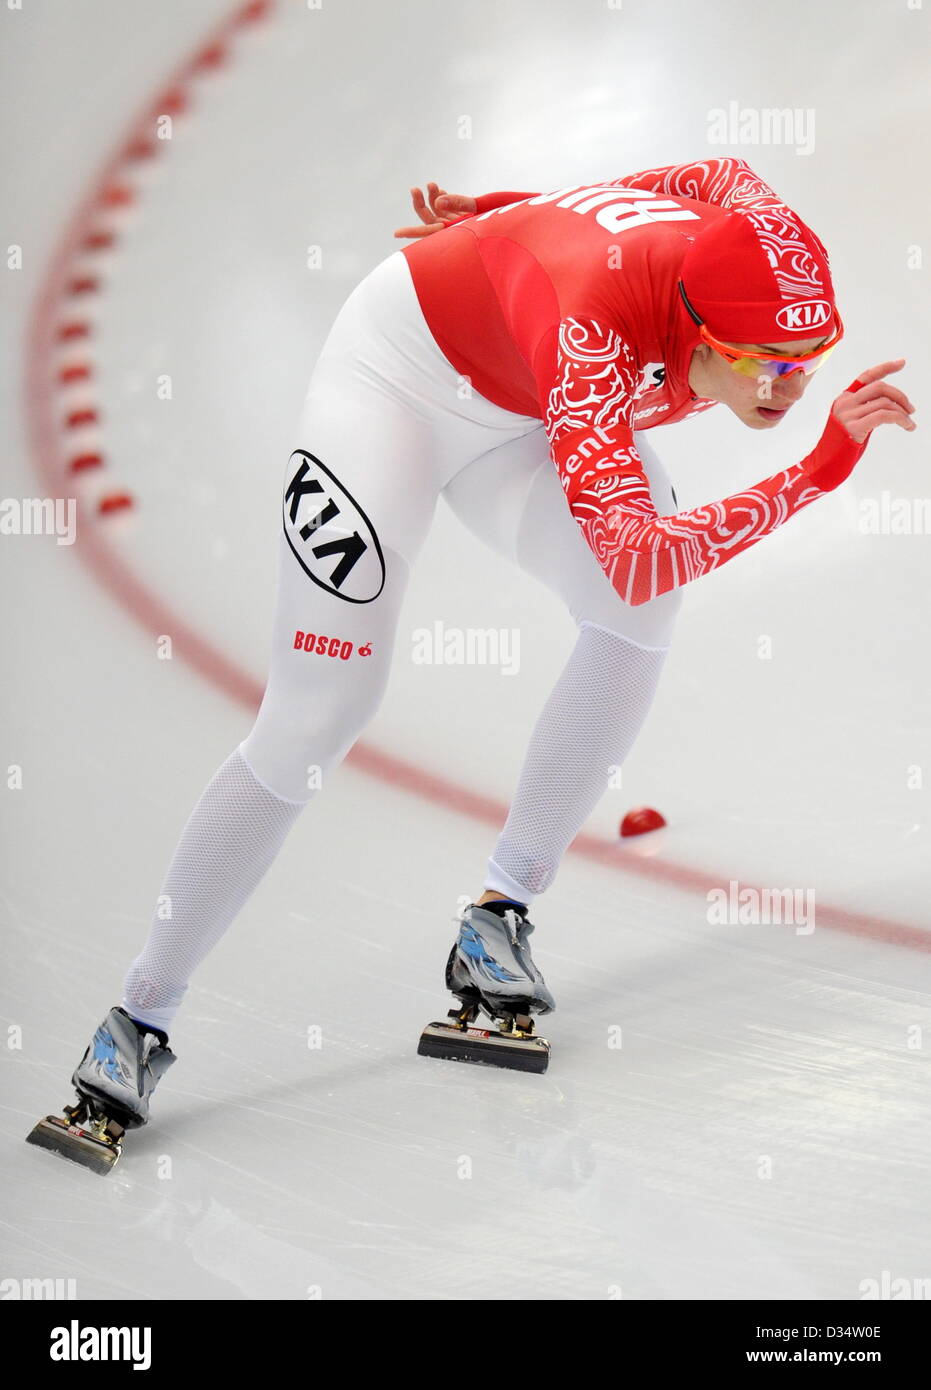 09.02.2013. Inzell, Germany.  Russian speed skater Yekaterina Shikhova competes in the women's 1500m race of the Speed Skating World Cup at Max-Aicher-Arena in Inzell, Germany. Yekaterina Shikhova finished in third place. Stock Photo